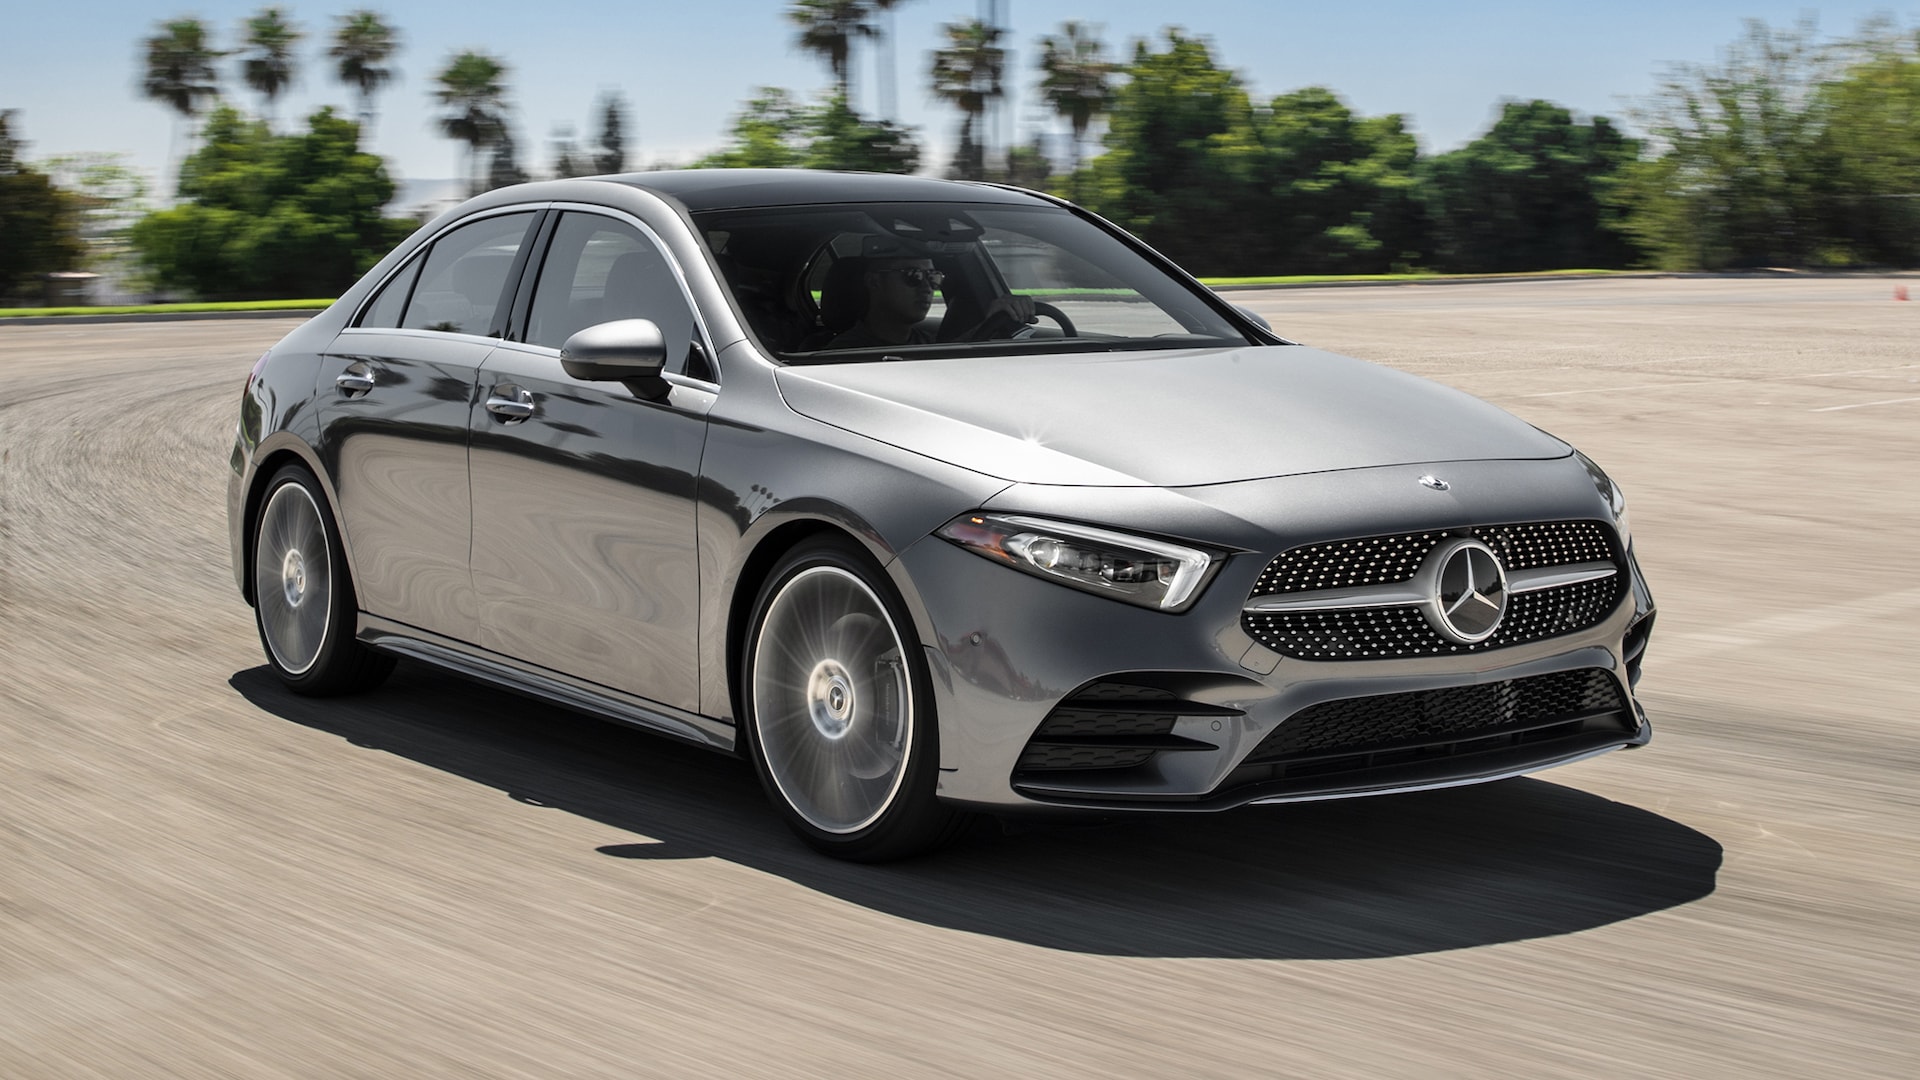 2019 Mercedes A 220 Review: We Test the Mercedes of Entry-Level Luxury Cars